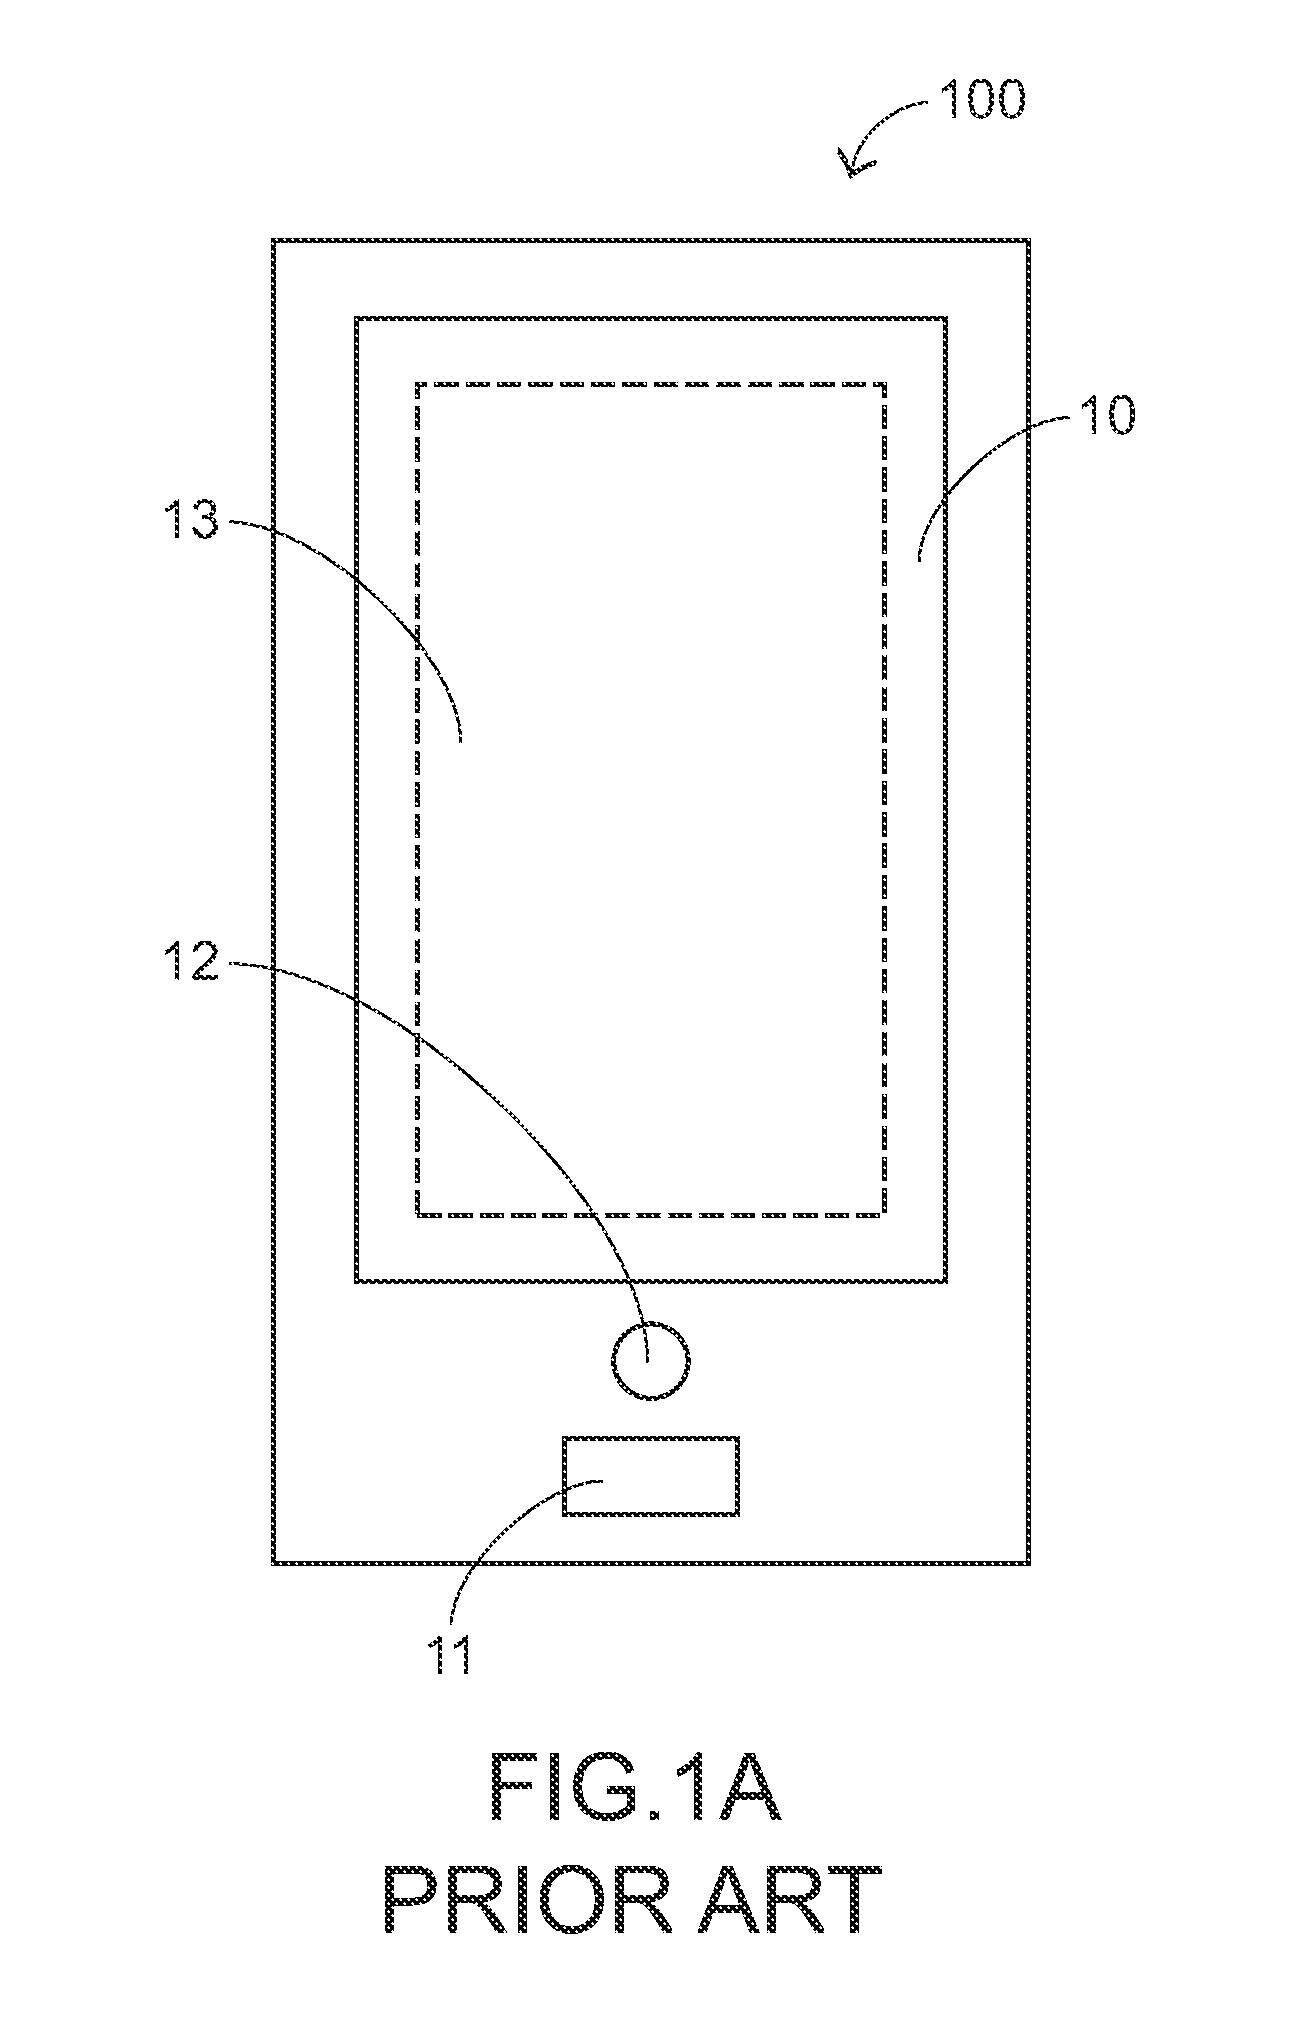 Method and computer program product of switching locked state of electronic device